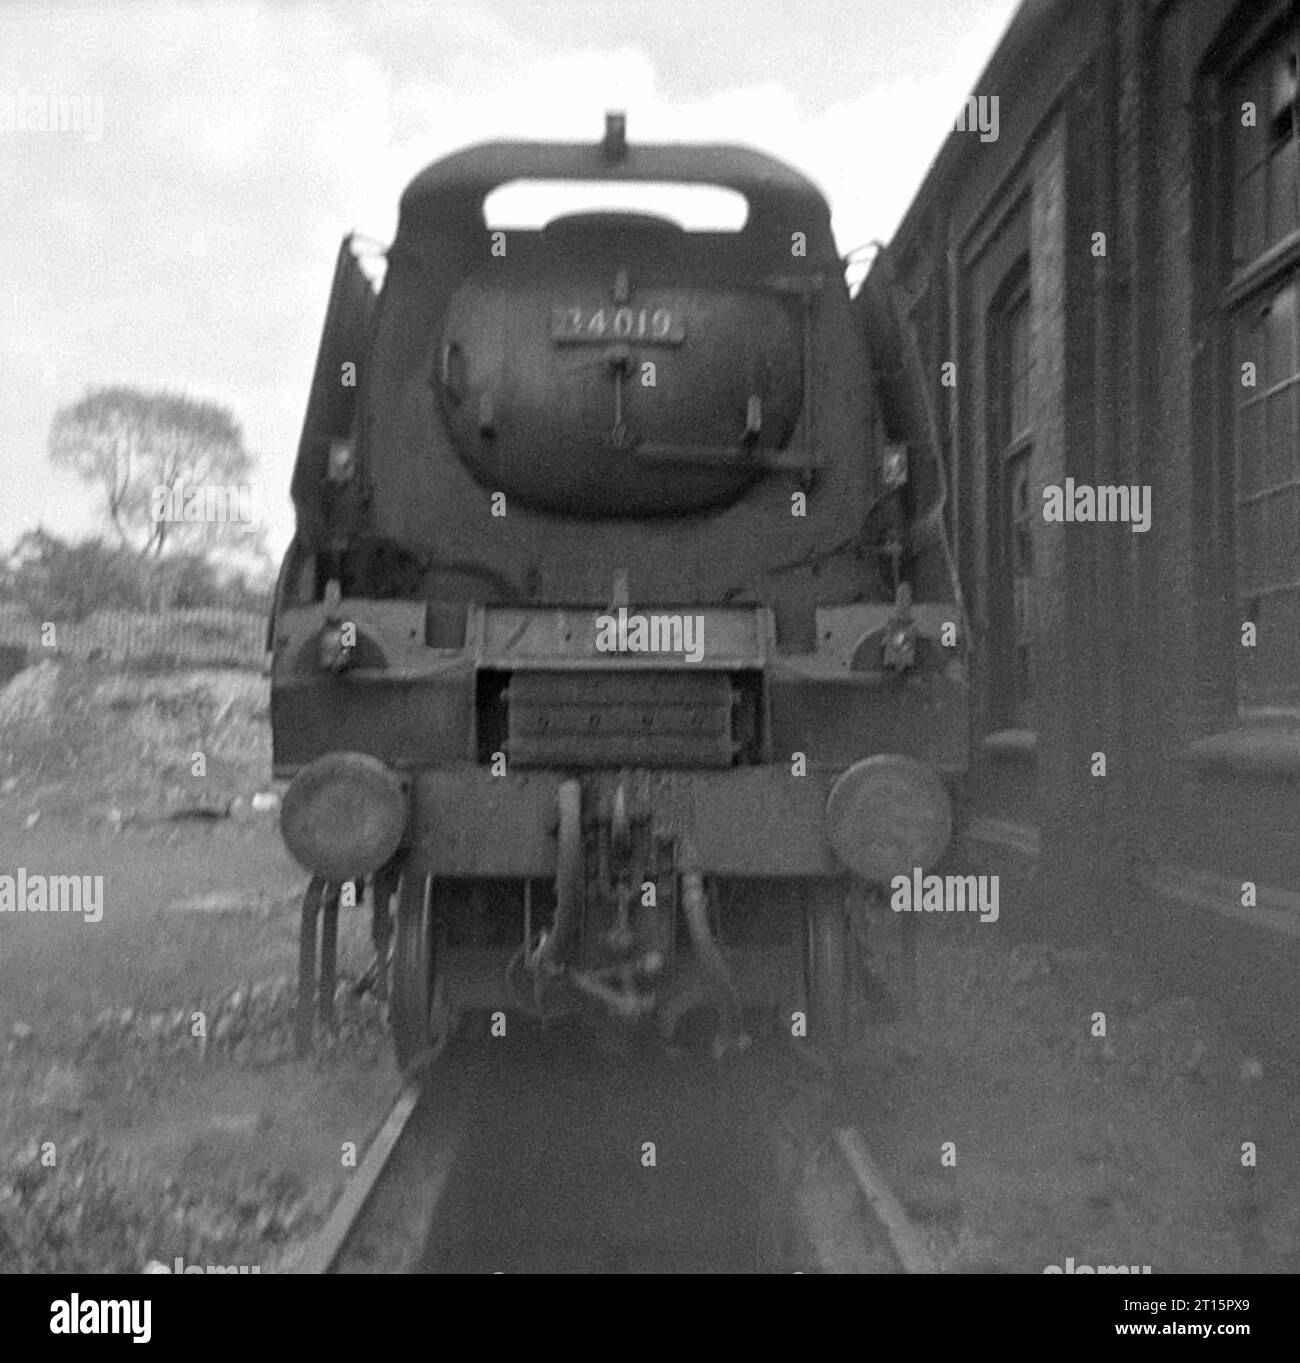 34018 and others at Basingstoke 1965-67 Stock Photo